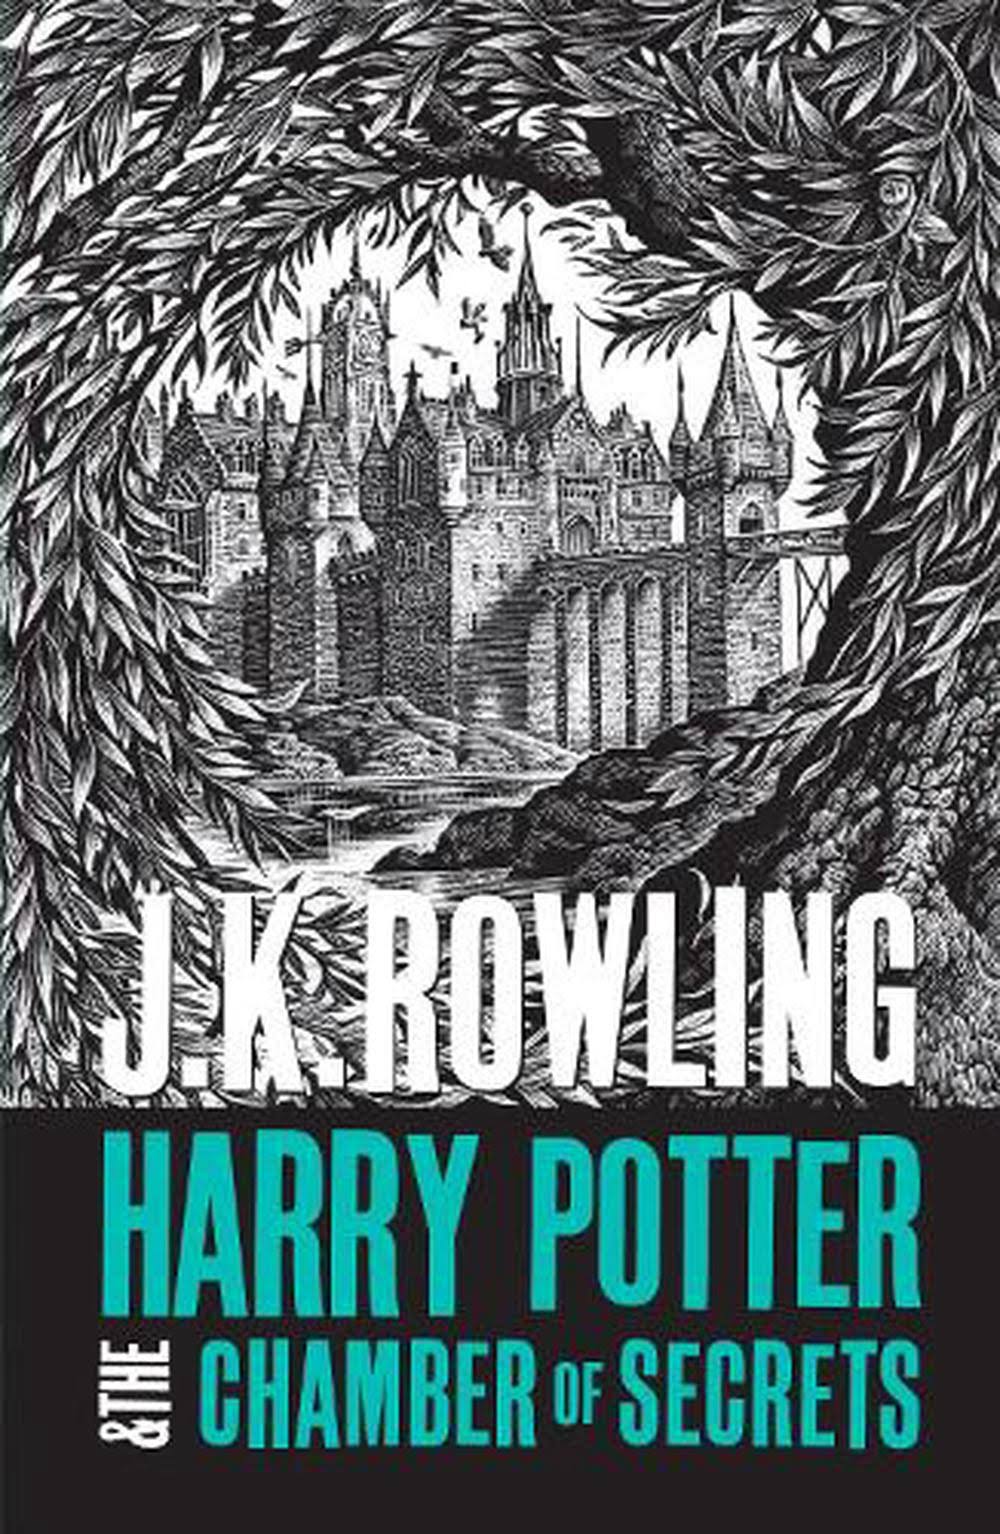 Harry Potter and The Chamber of Secrets by J K Rowling